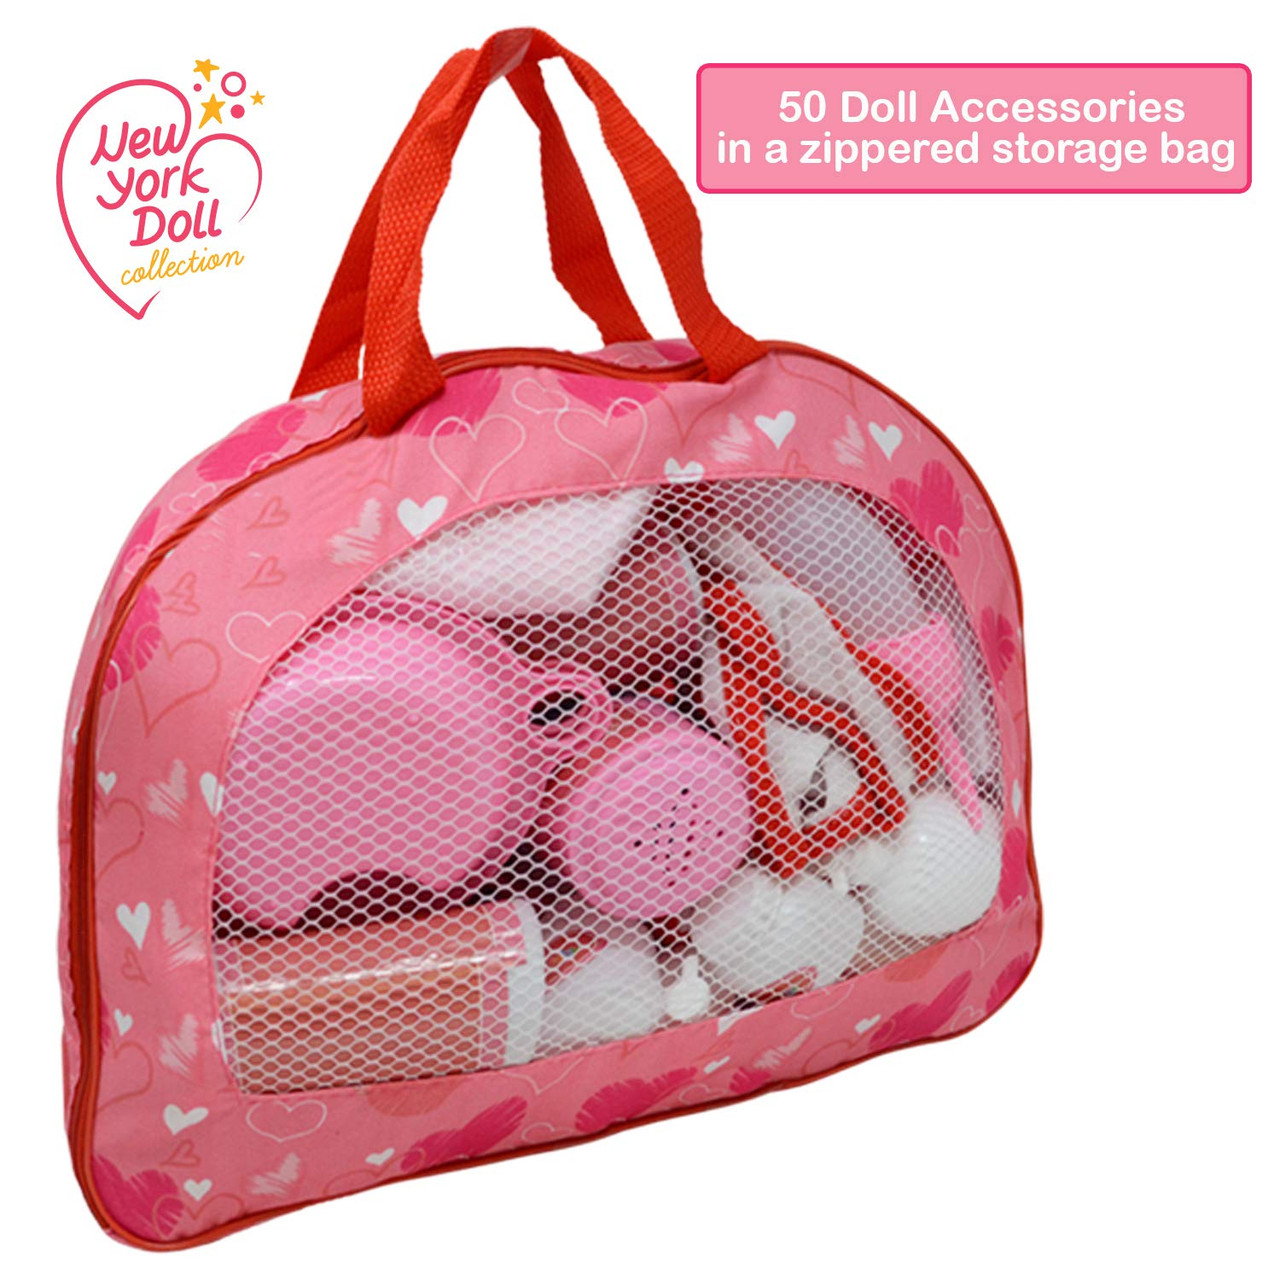 50Piece Baby Doll Feeding & Caring Accessory Set in Zippered Carrying Case - Accessories for Dolls Toys 4 U